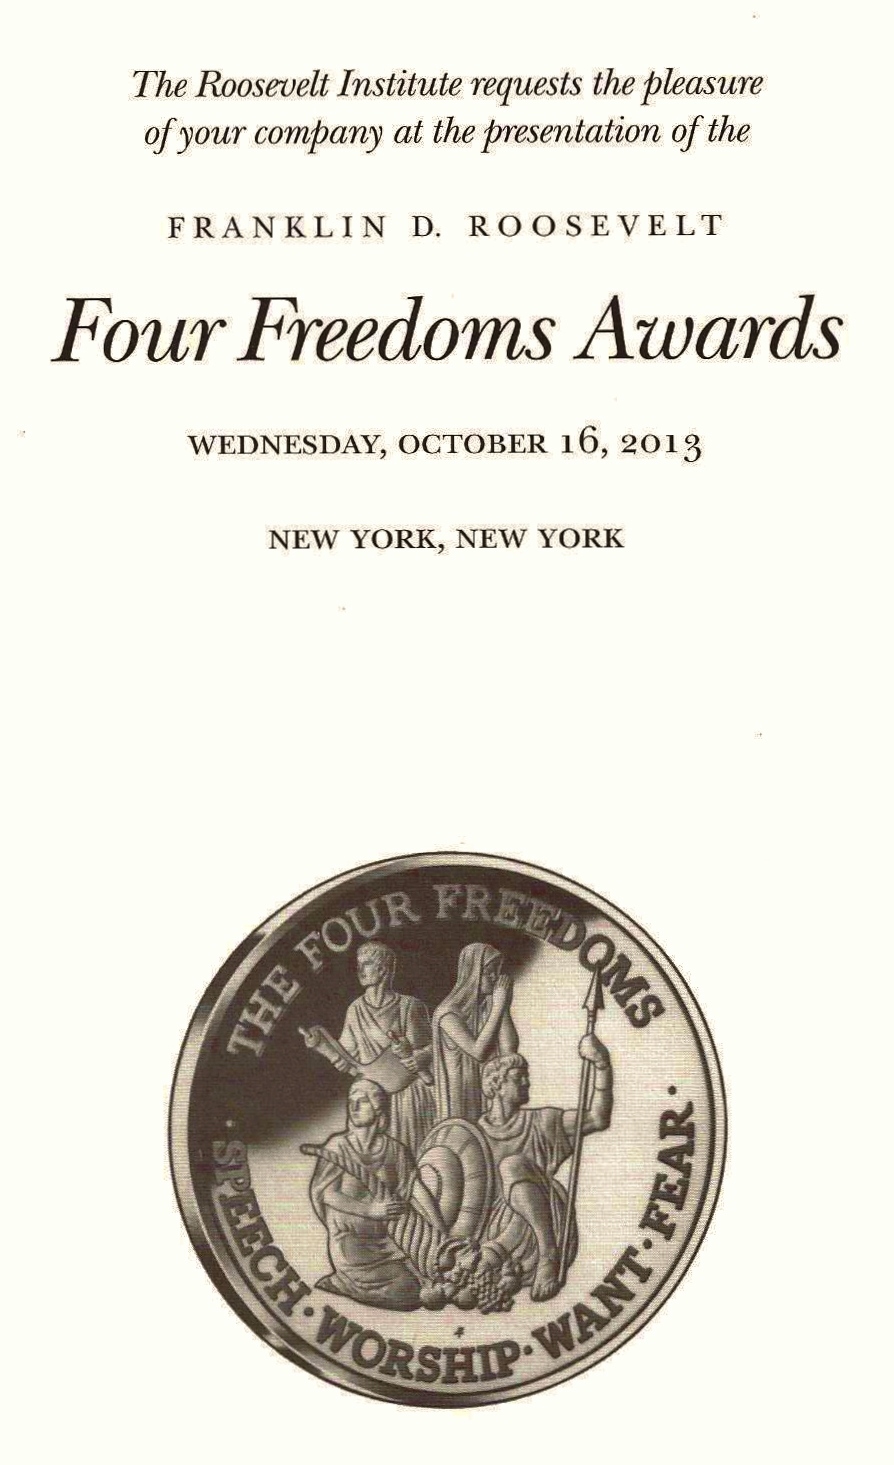 FREE TO ATTEND FOUR FREEDOMS AWARDS?